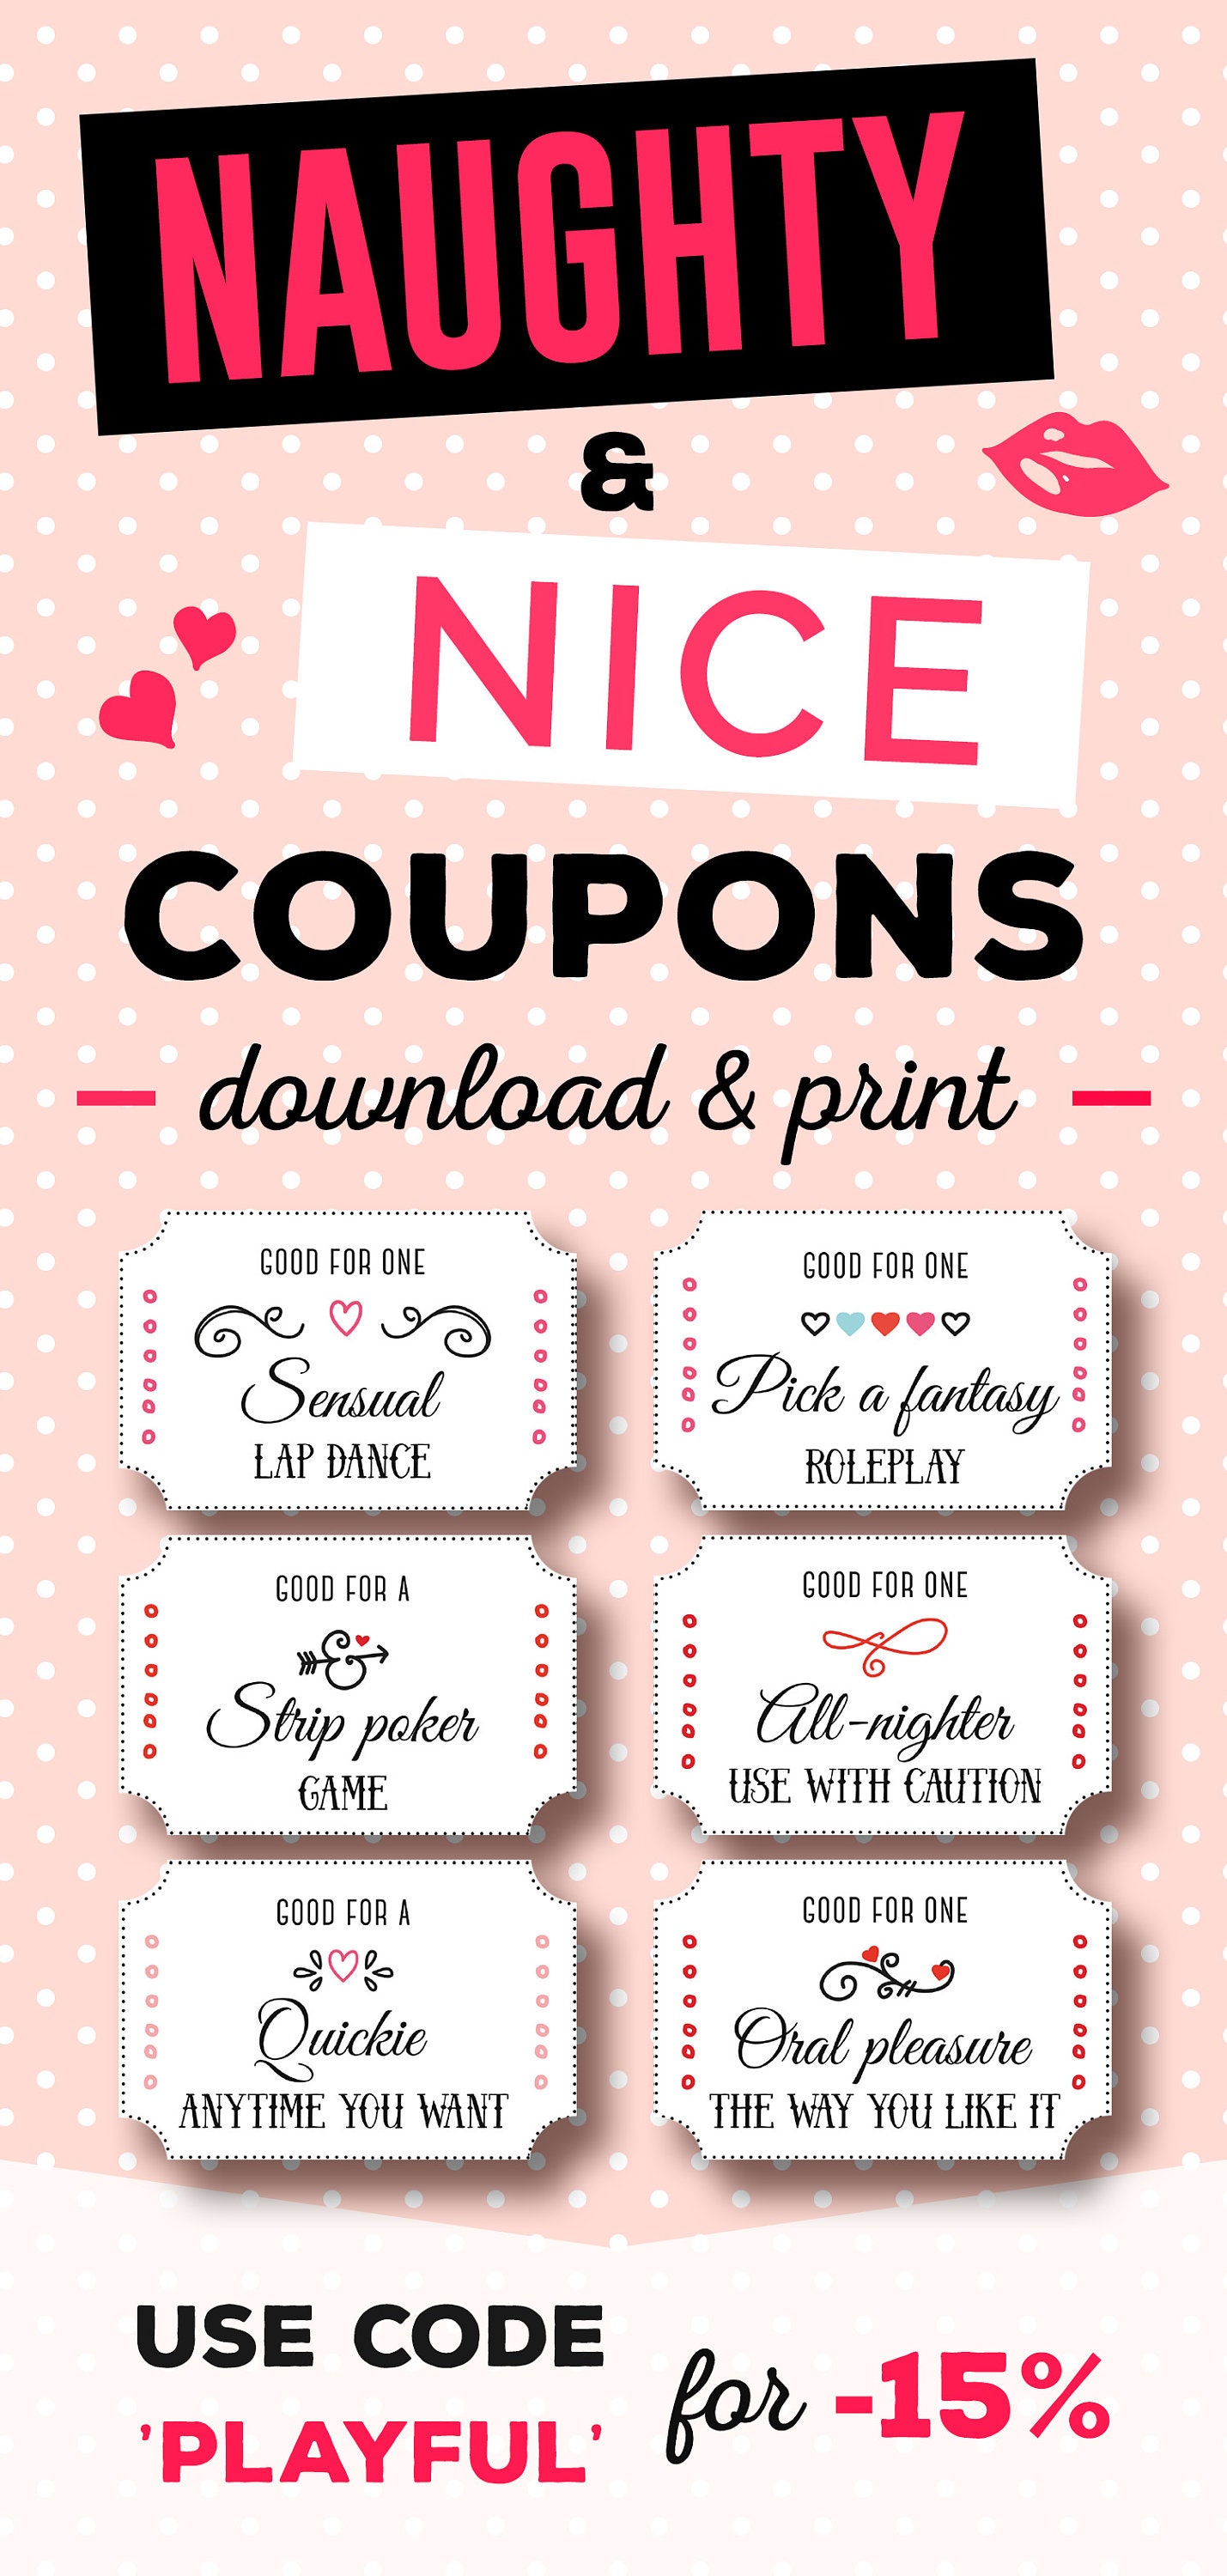 Naughty Coupon Book for Him Love Coupon for Him Sex Coupon image